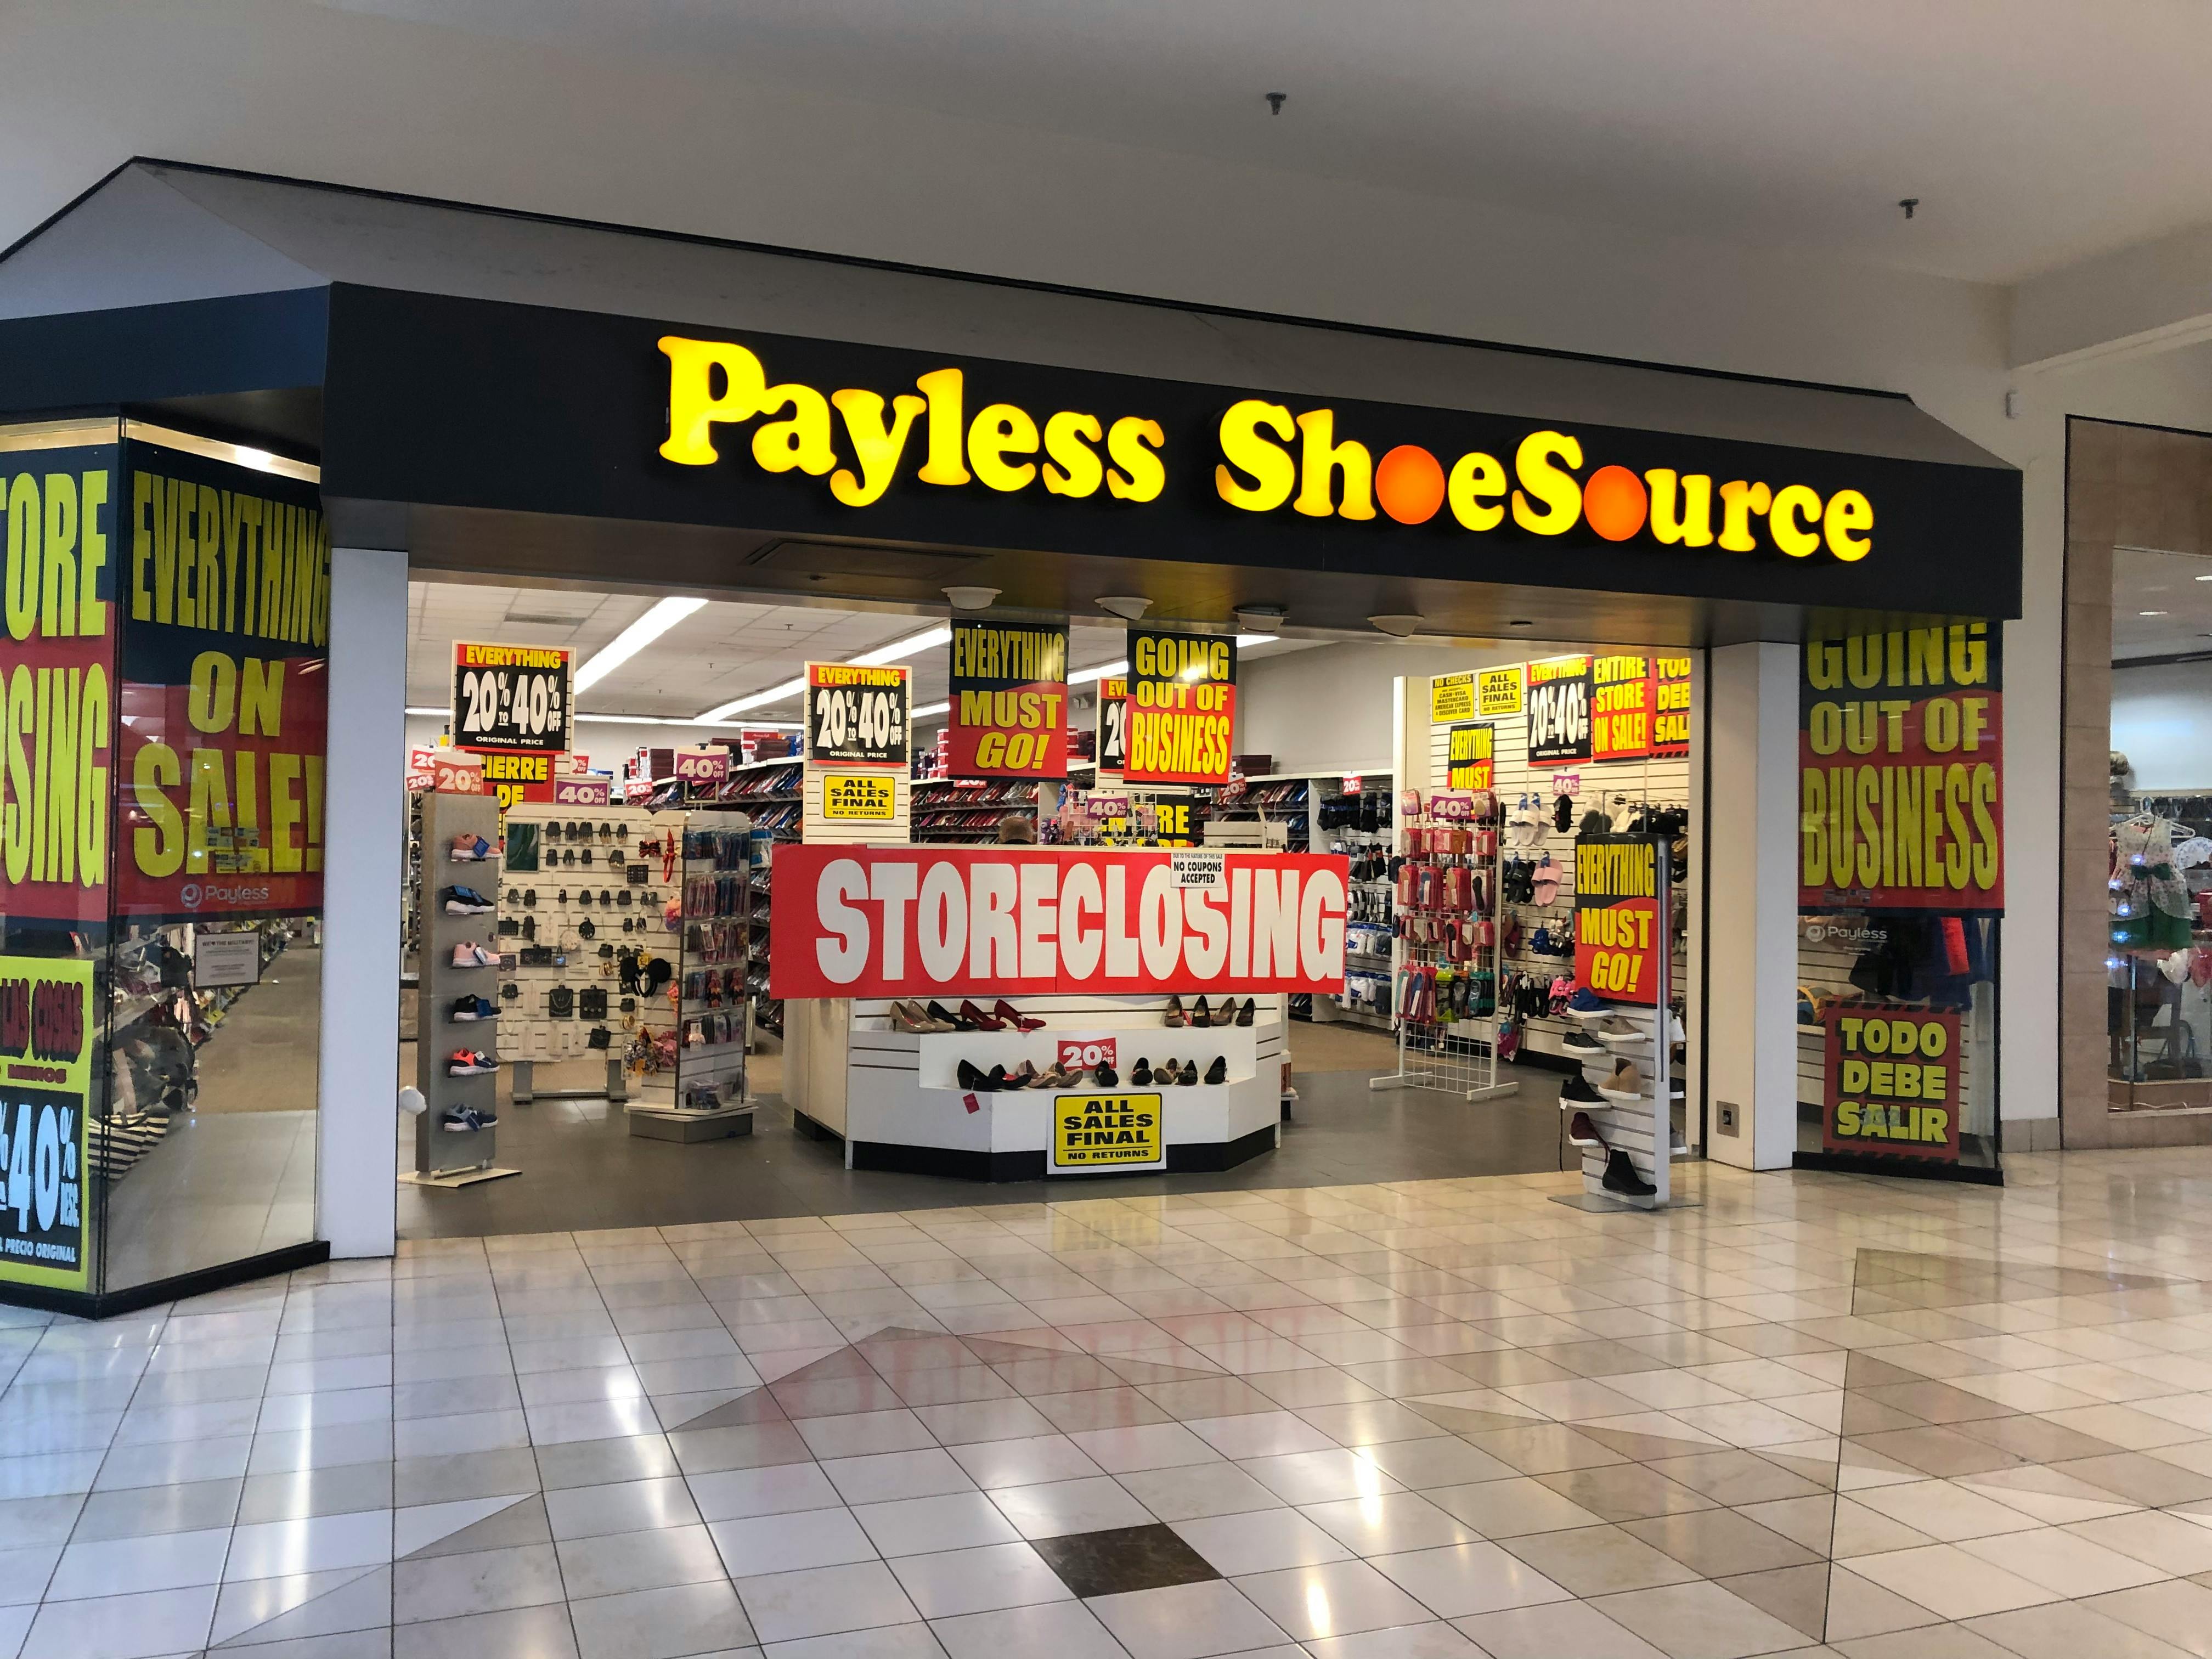 Payless Is Back and Planning to Open New Shoe Stores - The Krazy Coupon Lady